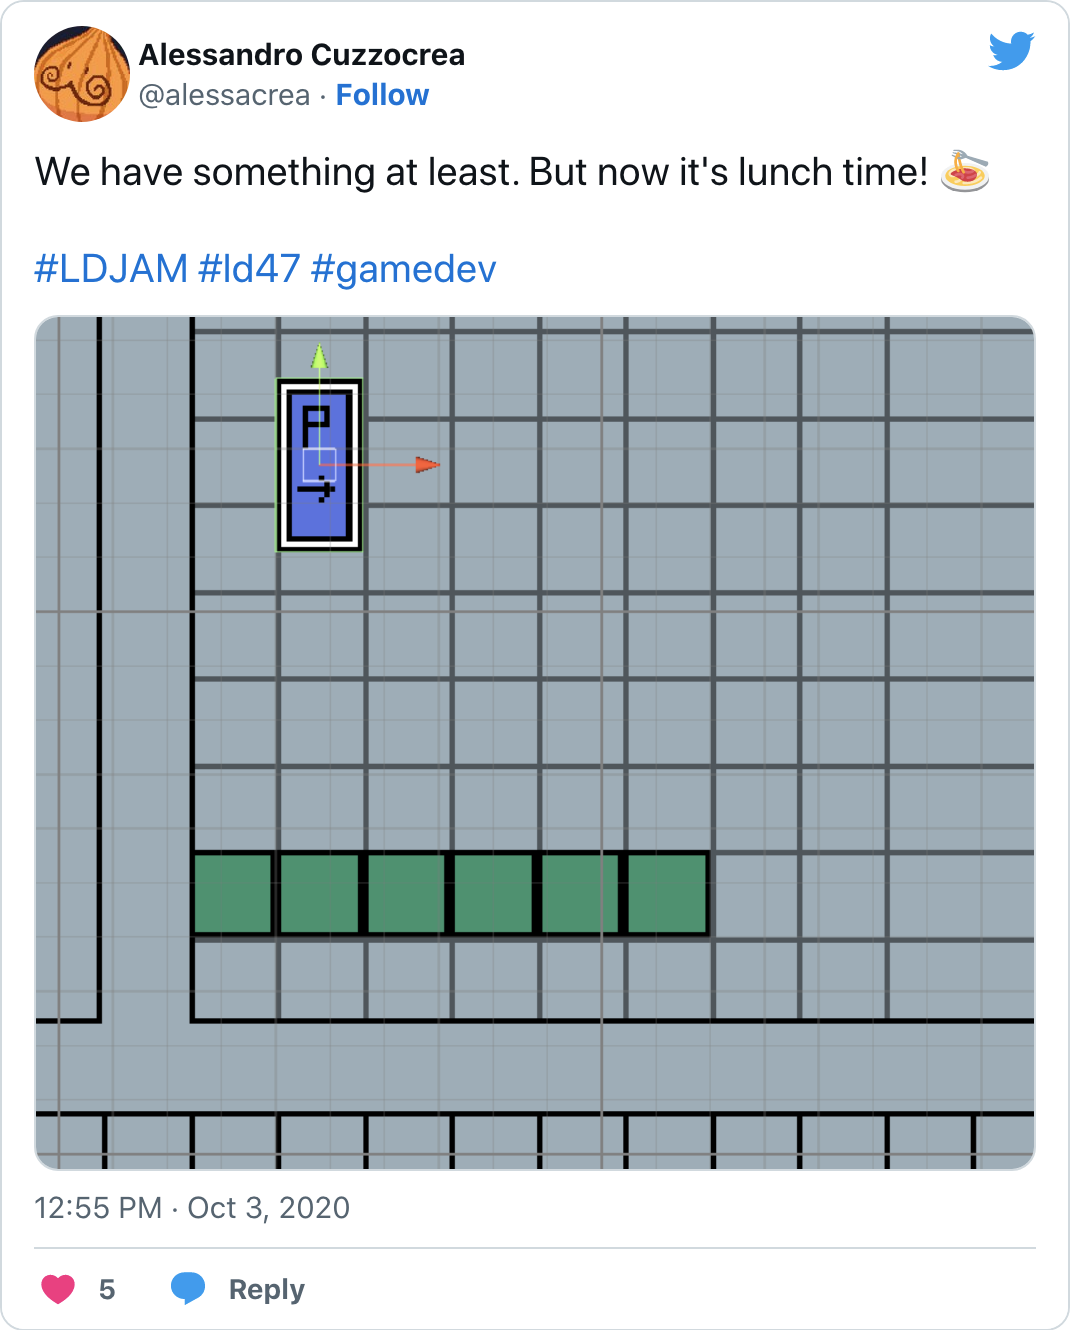 We have something at least. But now it's lunch time! 🍝 #LDJAM #ld47 #gamedev